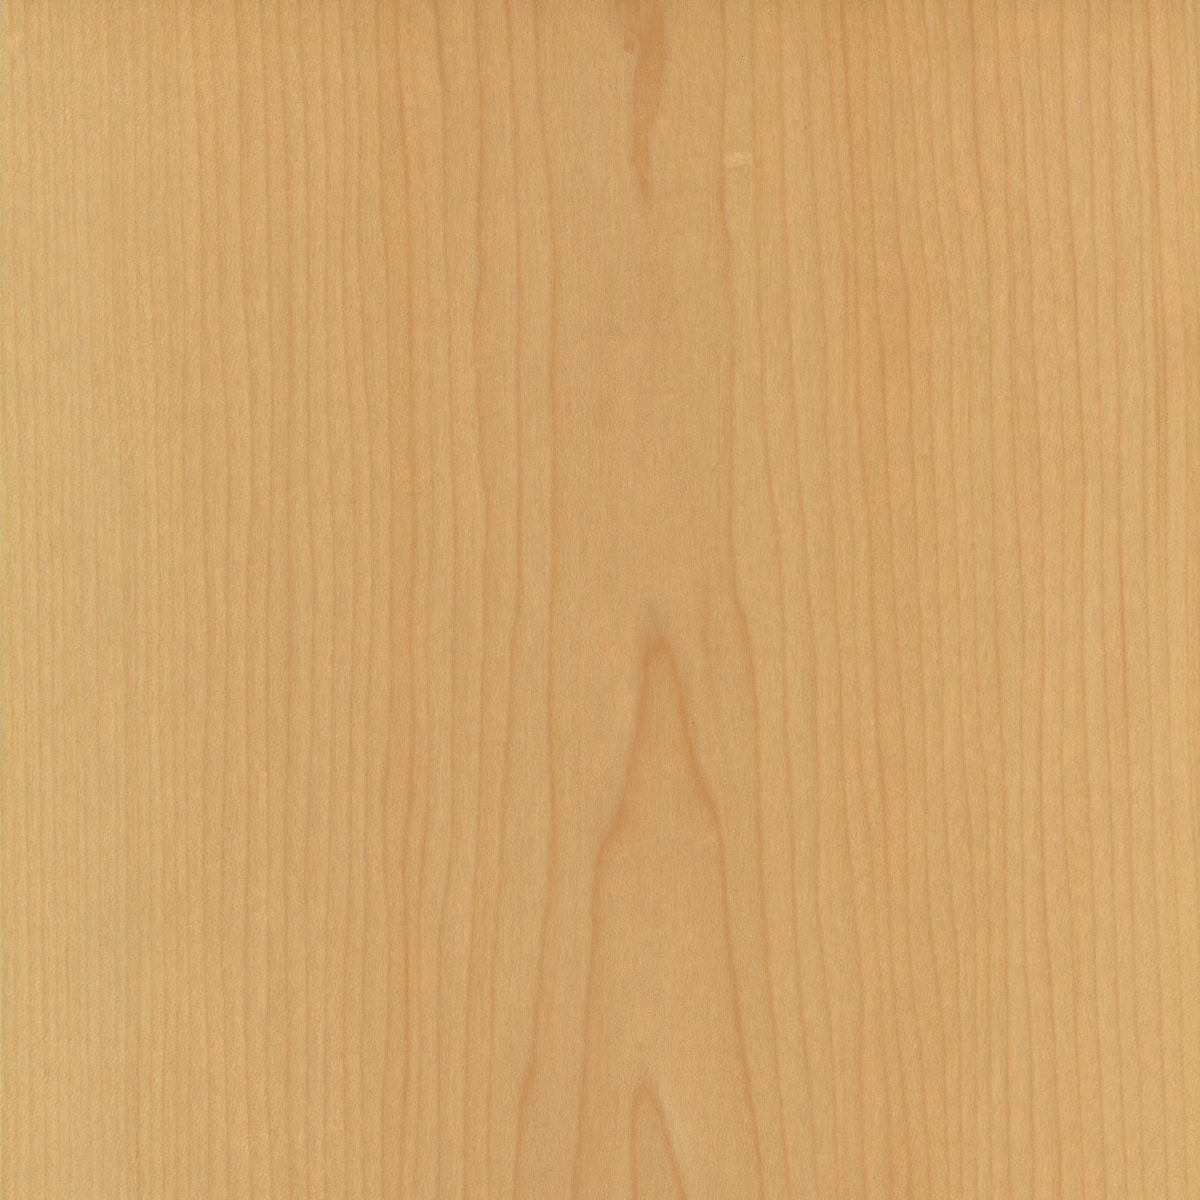 A swatch of Naturall Flat Cut Maple.